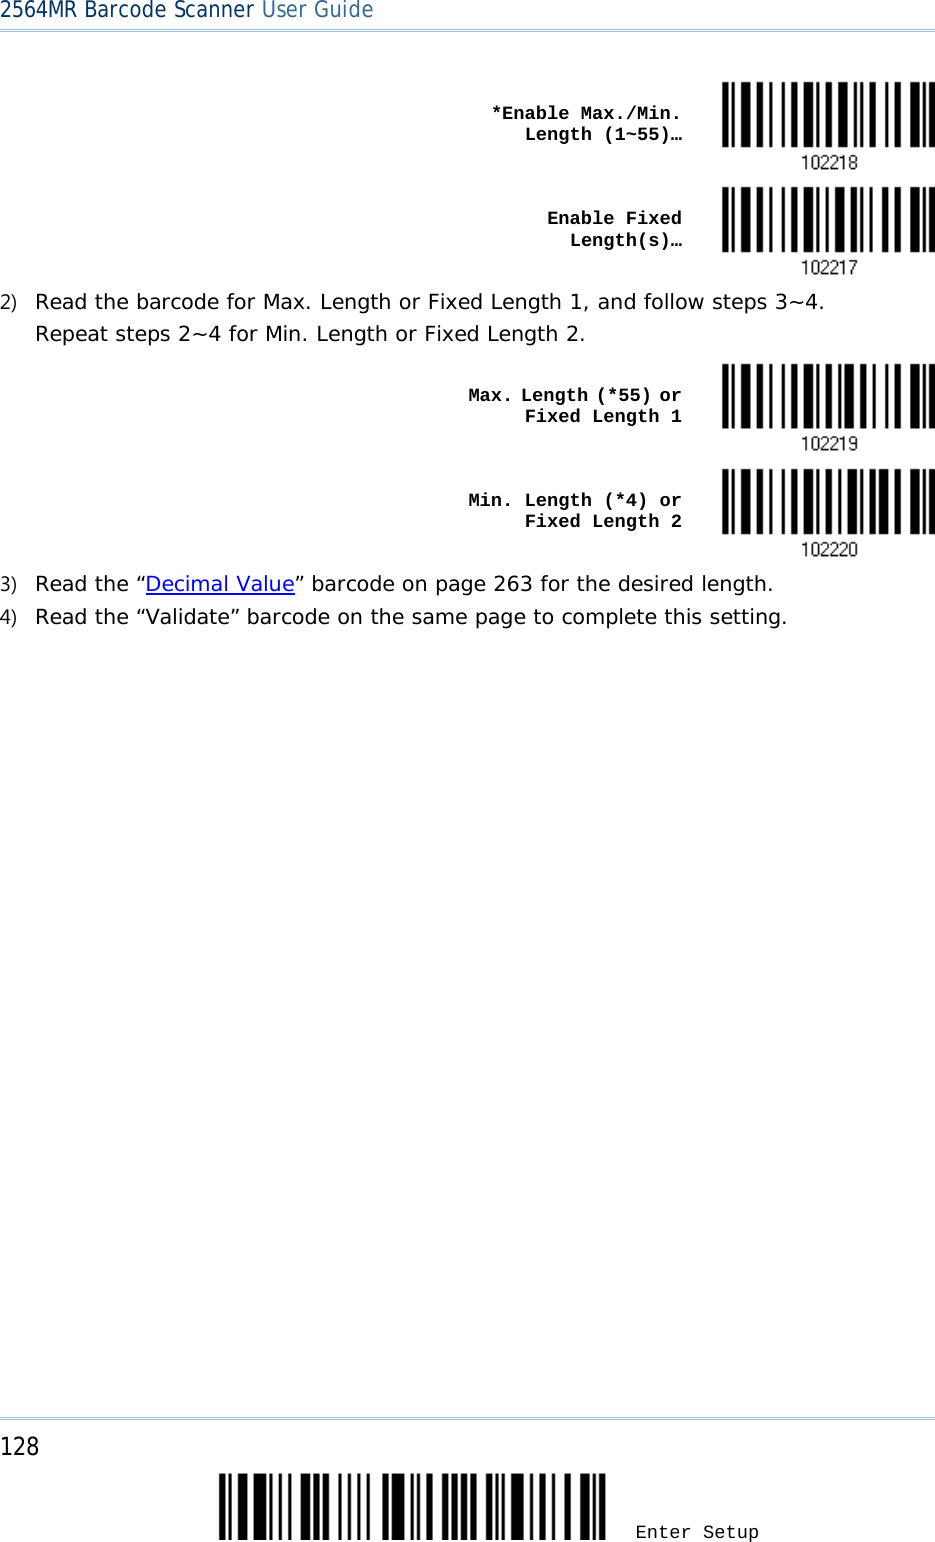 2564MR Barcode Scanner User Guide     *Enable Max./Min. Length (1~55)…     Enable Fixed Length(s)…  2) Read the barcode for Max. Length or Fixed Length 1, and follow steps 3~4. Repeat steps 2~4 for Min. Length or Fixed Length 2.    Max. Length (*55) or Fixed Length 1     Min. Length (*4) or Fixed Length 2  3) Read the “Decimal Value” barcode on page 263 for the desired length.  4) Read the “Validate” barcode on the same page to complete this setting.  128 Enter Setup 